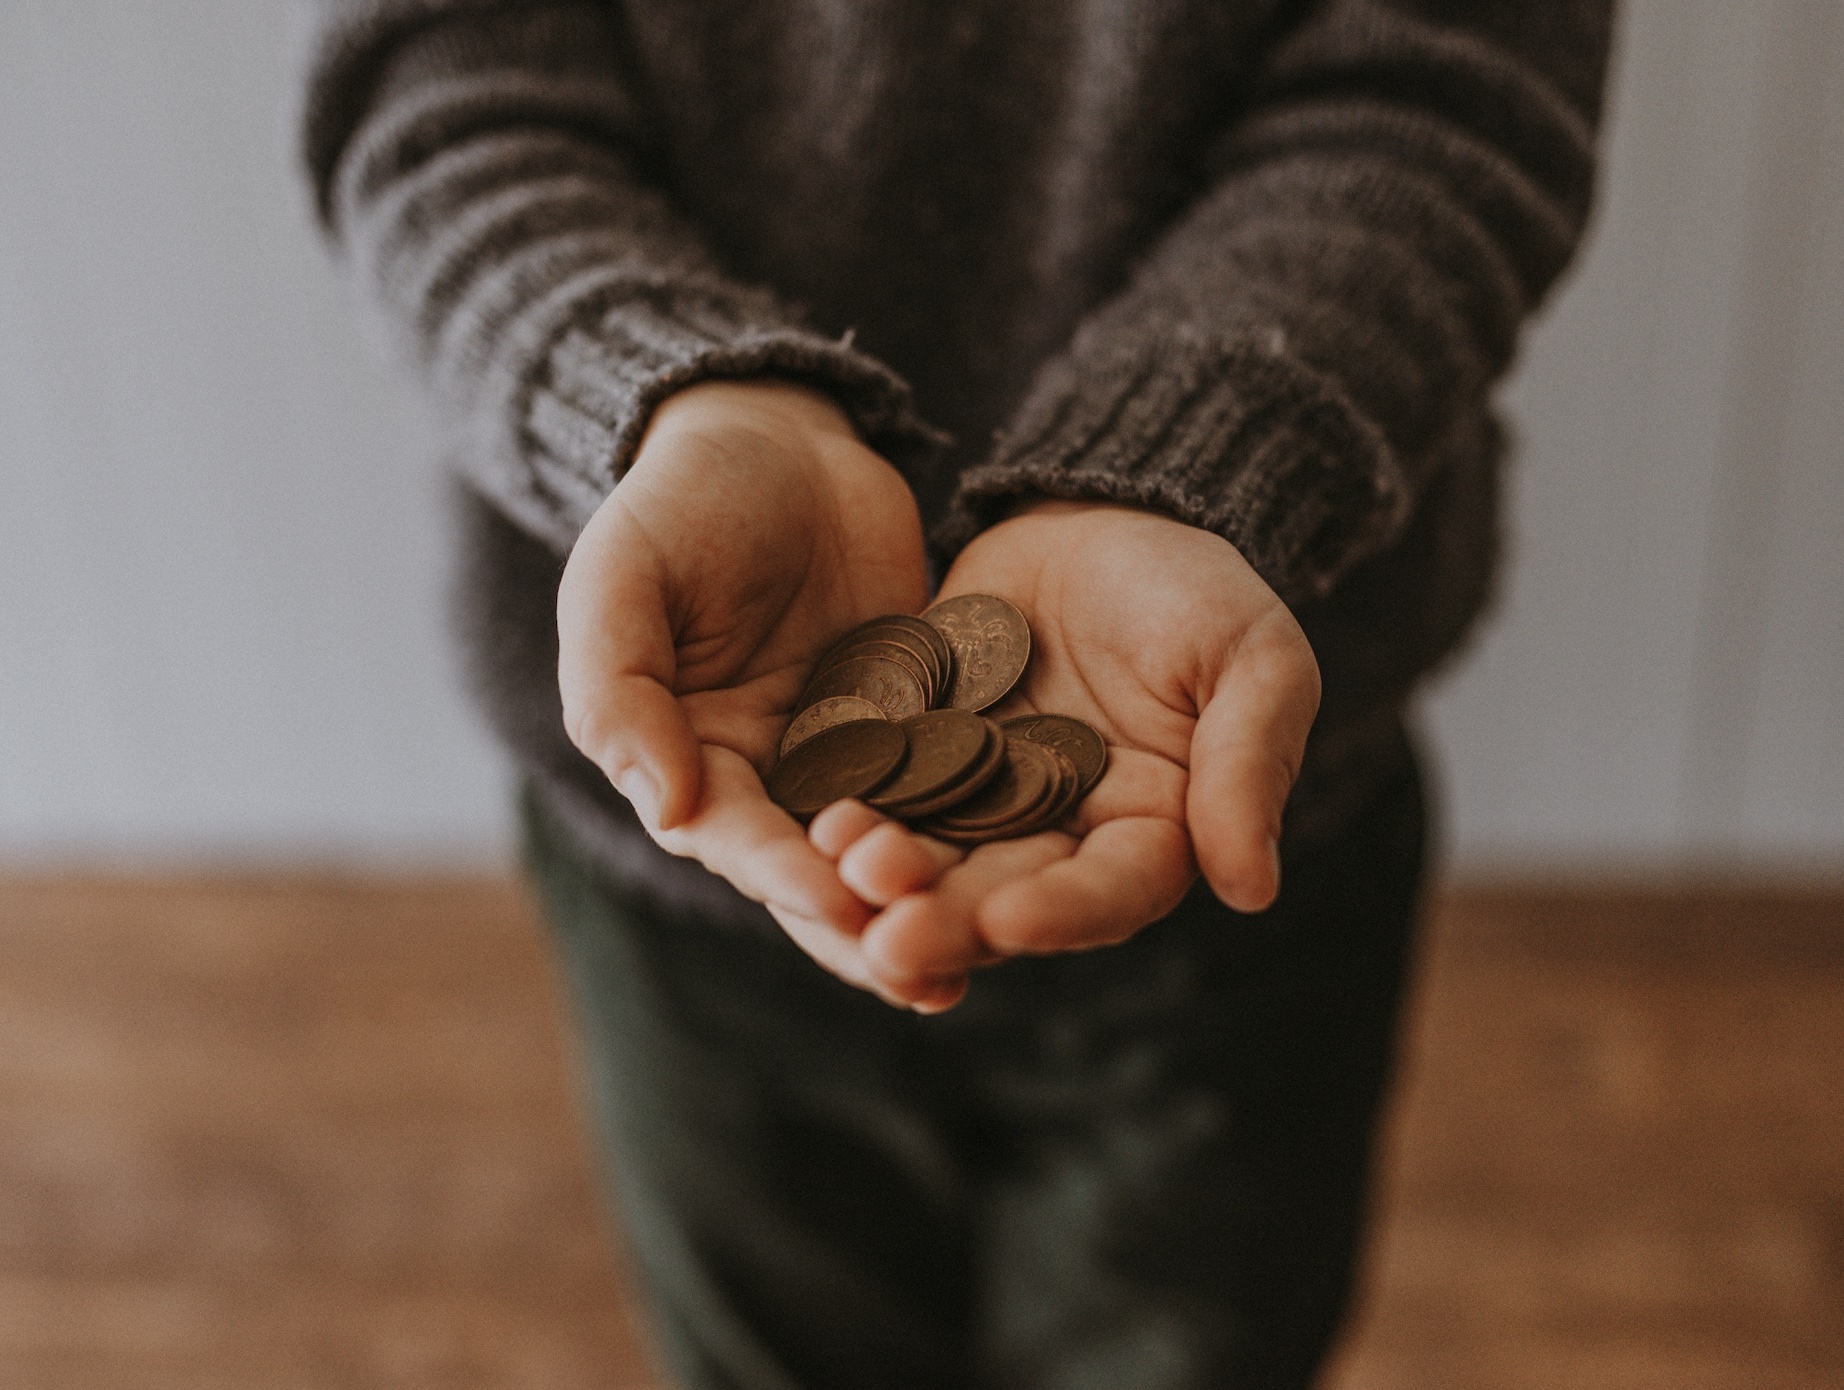 Man in brown sweater holding out hands with coins; image by Annie Spratt, via Unsplash.com.